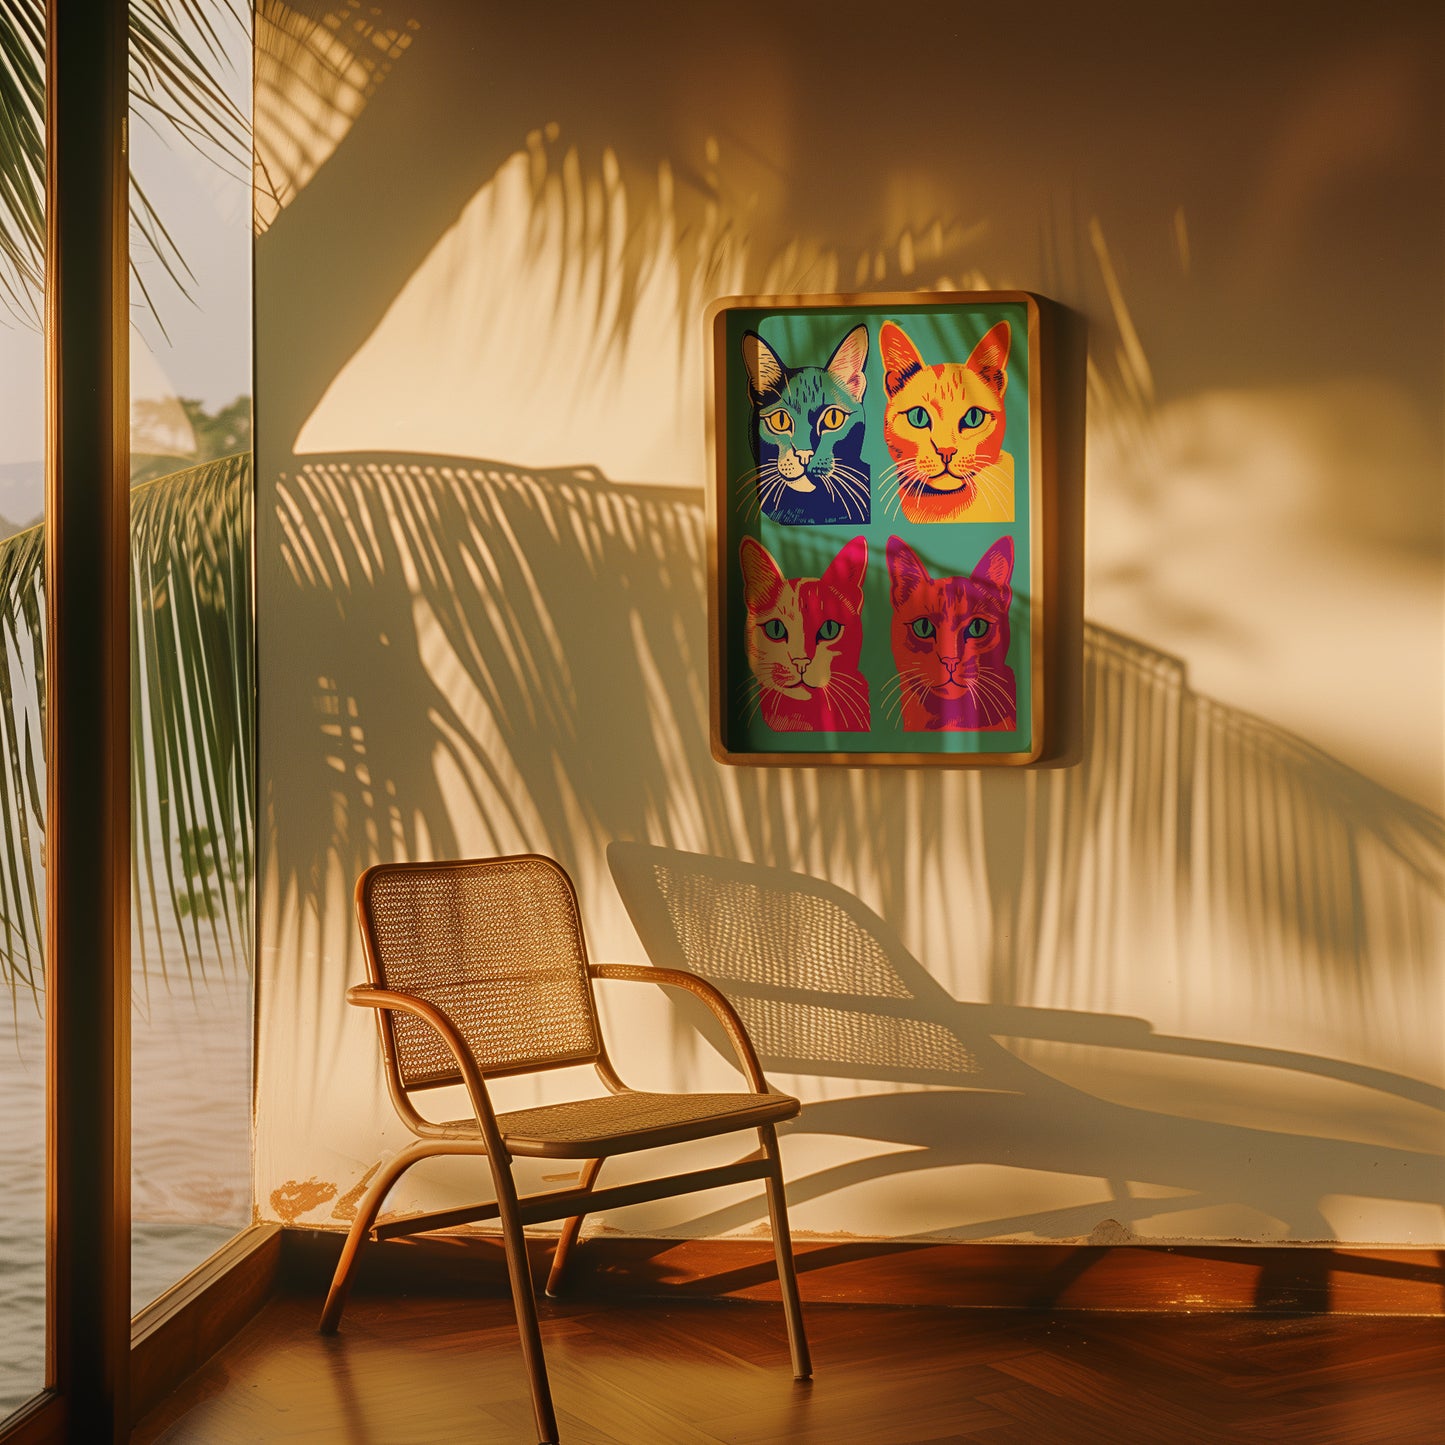 A cozy room at sunset with a chair and a colorful four-cat portrait on the wall.